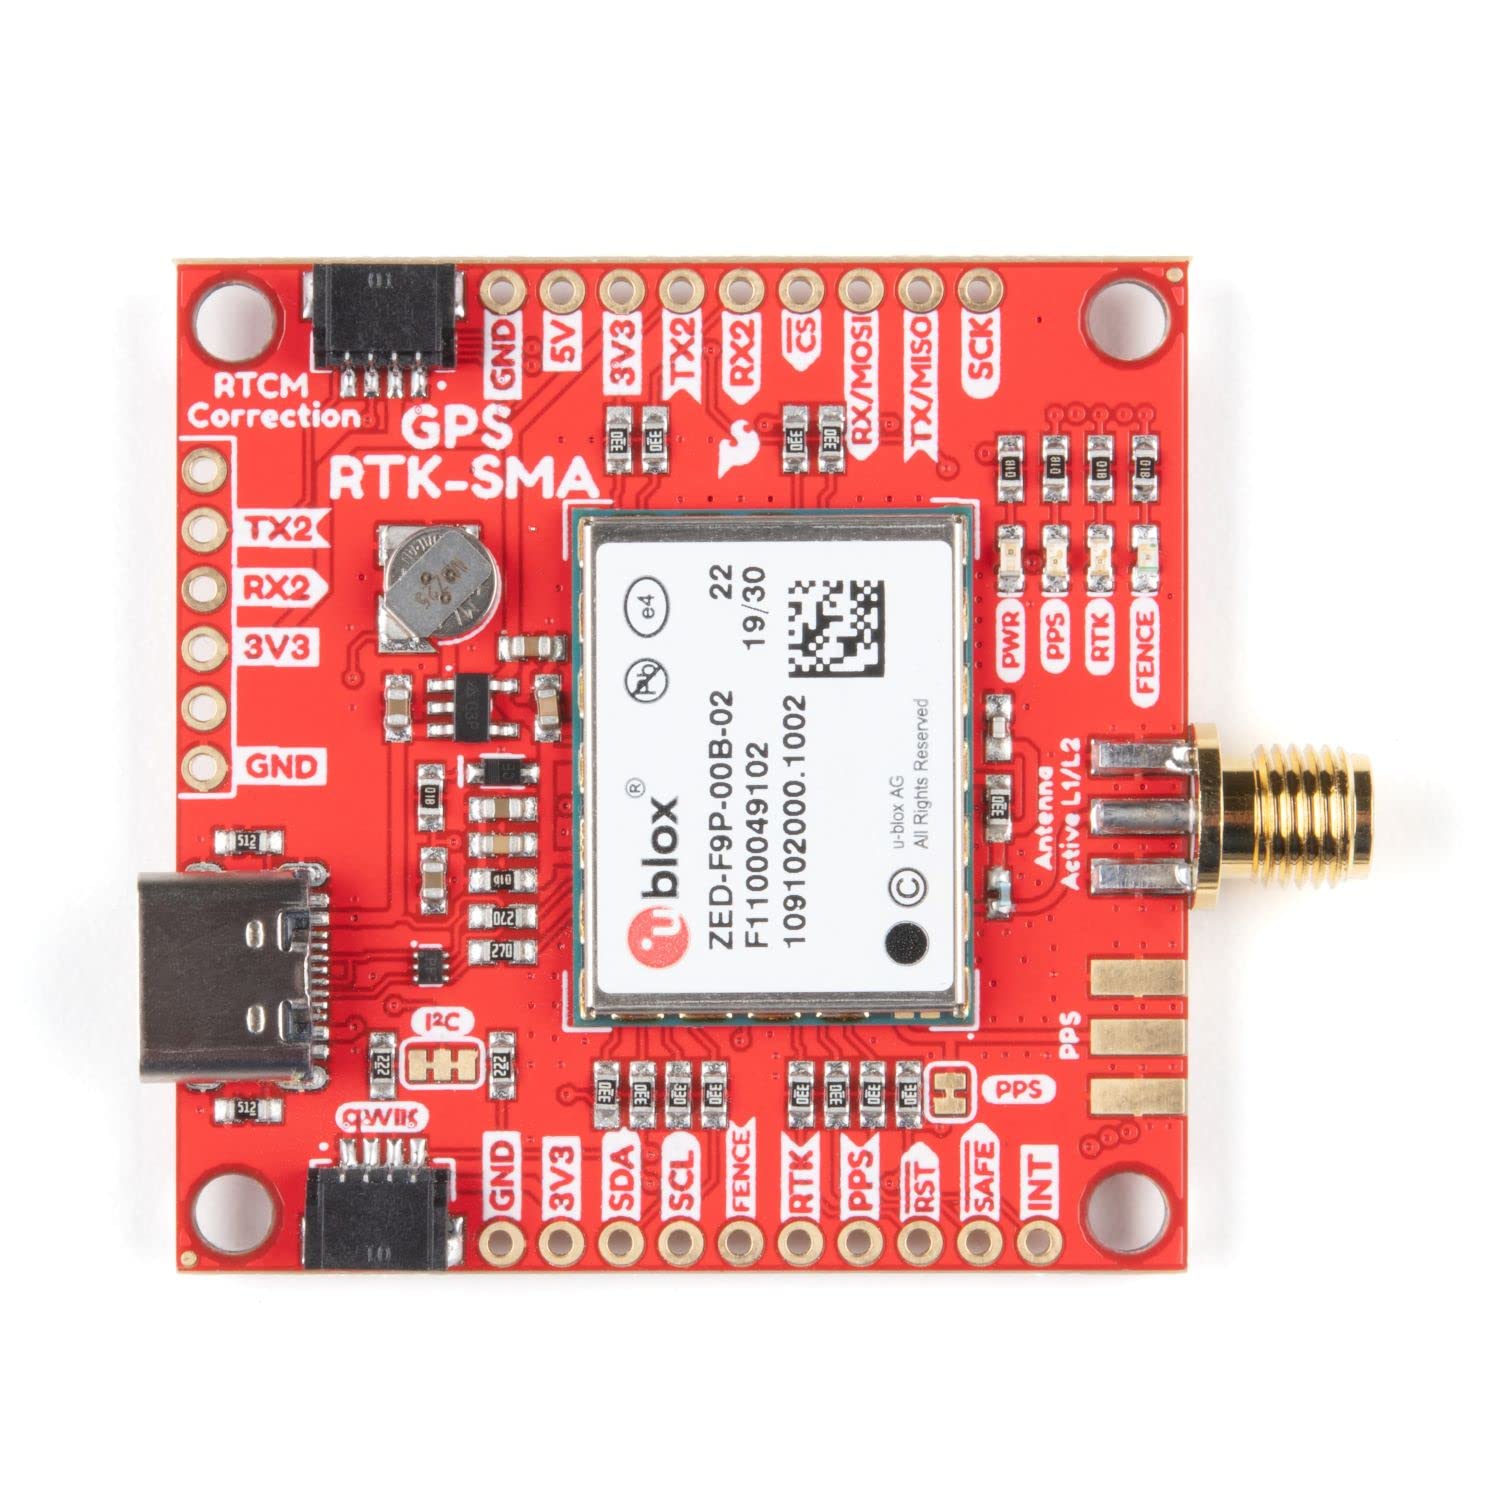 SparkFun GPS-RTK-SMA Breakout-ZED-F9P (Qwiic)-Concurrent reception of GPS GLONASS Galileo BeiDou High precision GPS 10mm 3 dimensional accuracy Receives L1C/A & L2C bands Voltage:5V or 3.3V Logic:3.3V